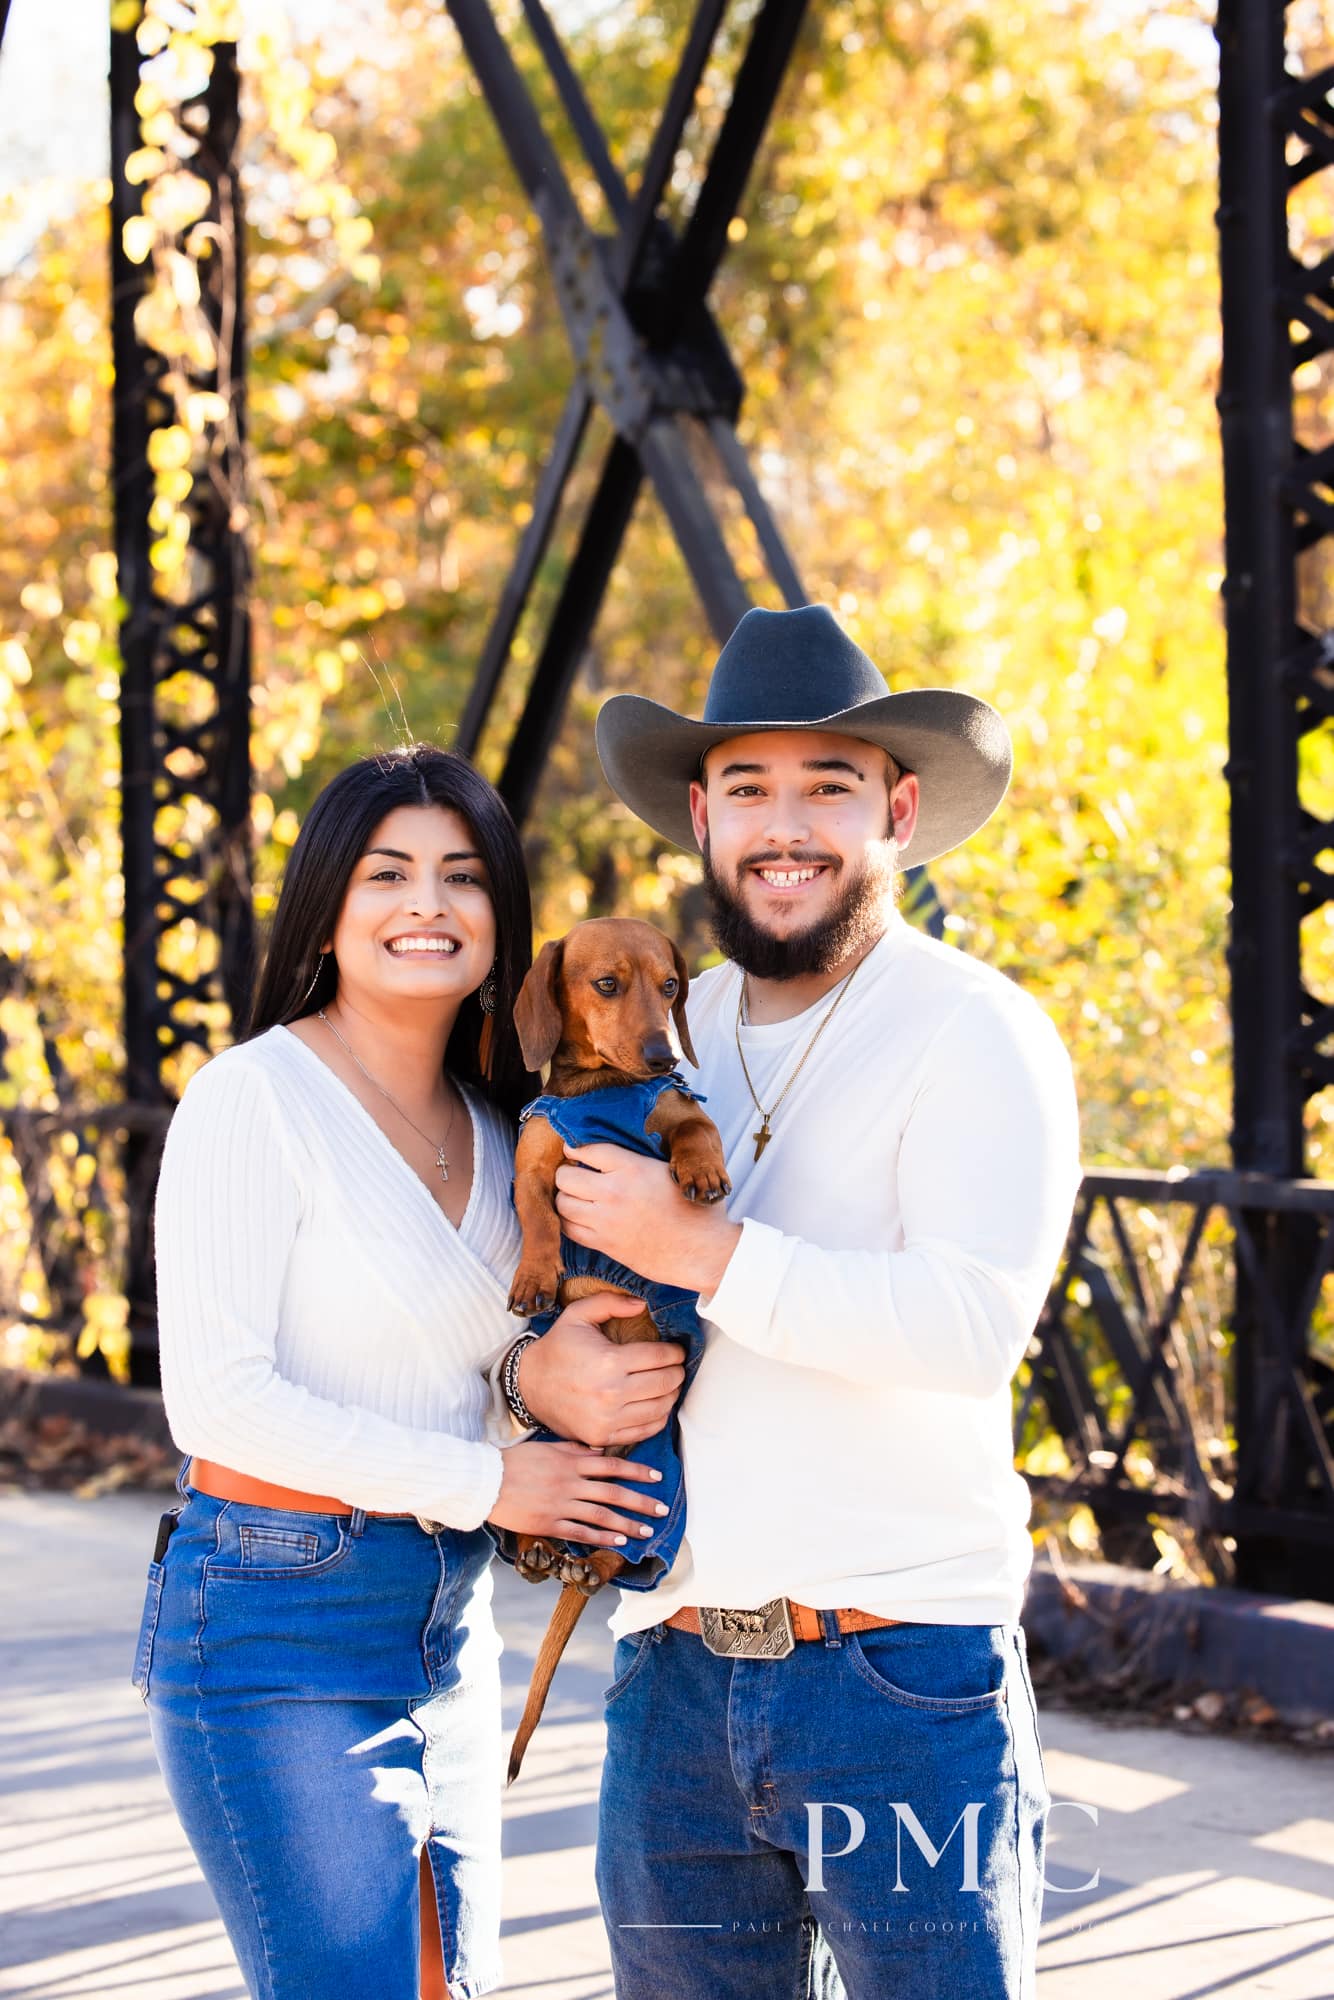 A couple smiles alongside their dog dressed in overalls in their fall engagement photos.